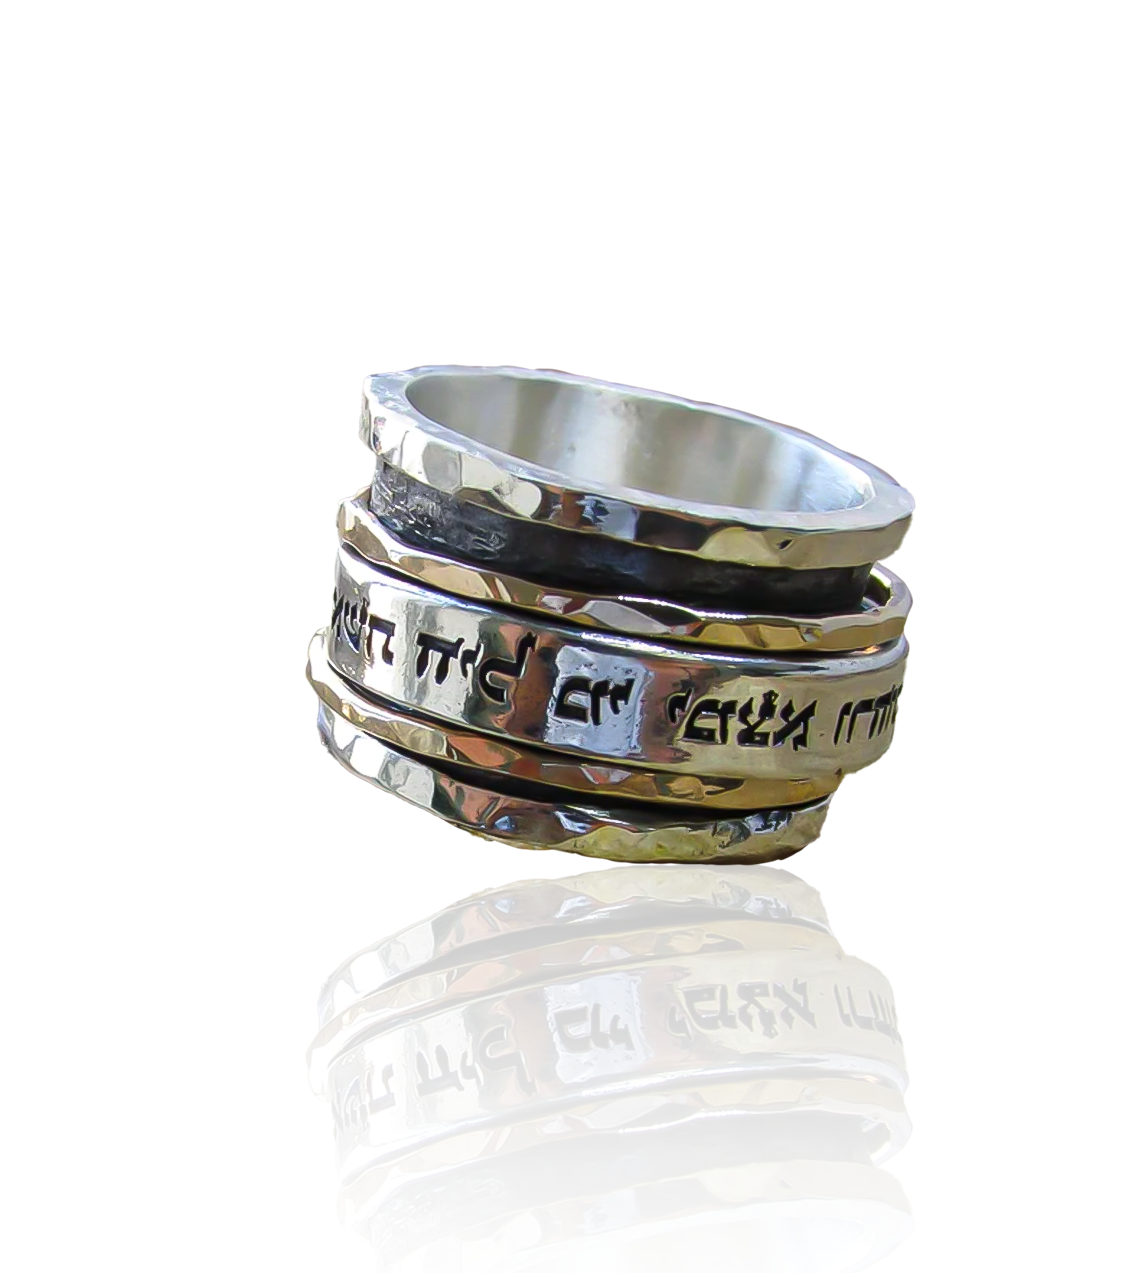 Ravit Hasday Jewelry | Hebrew rings | Succeed Engraved Men's Ring | Ravit  Hasday Jewish Jewelry